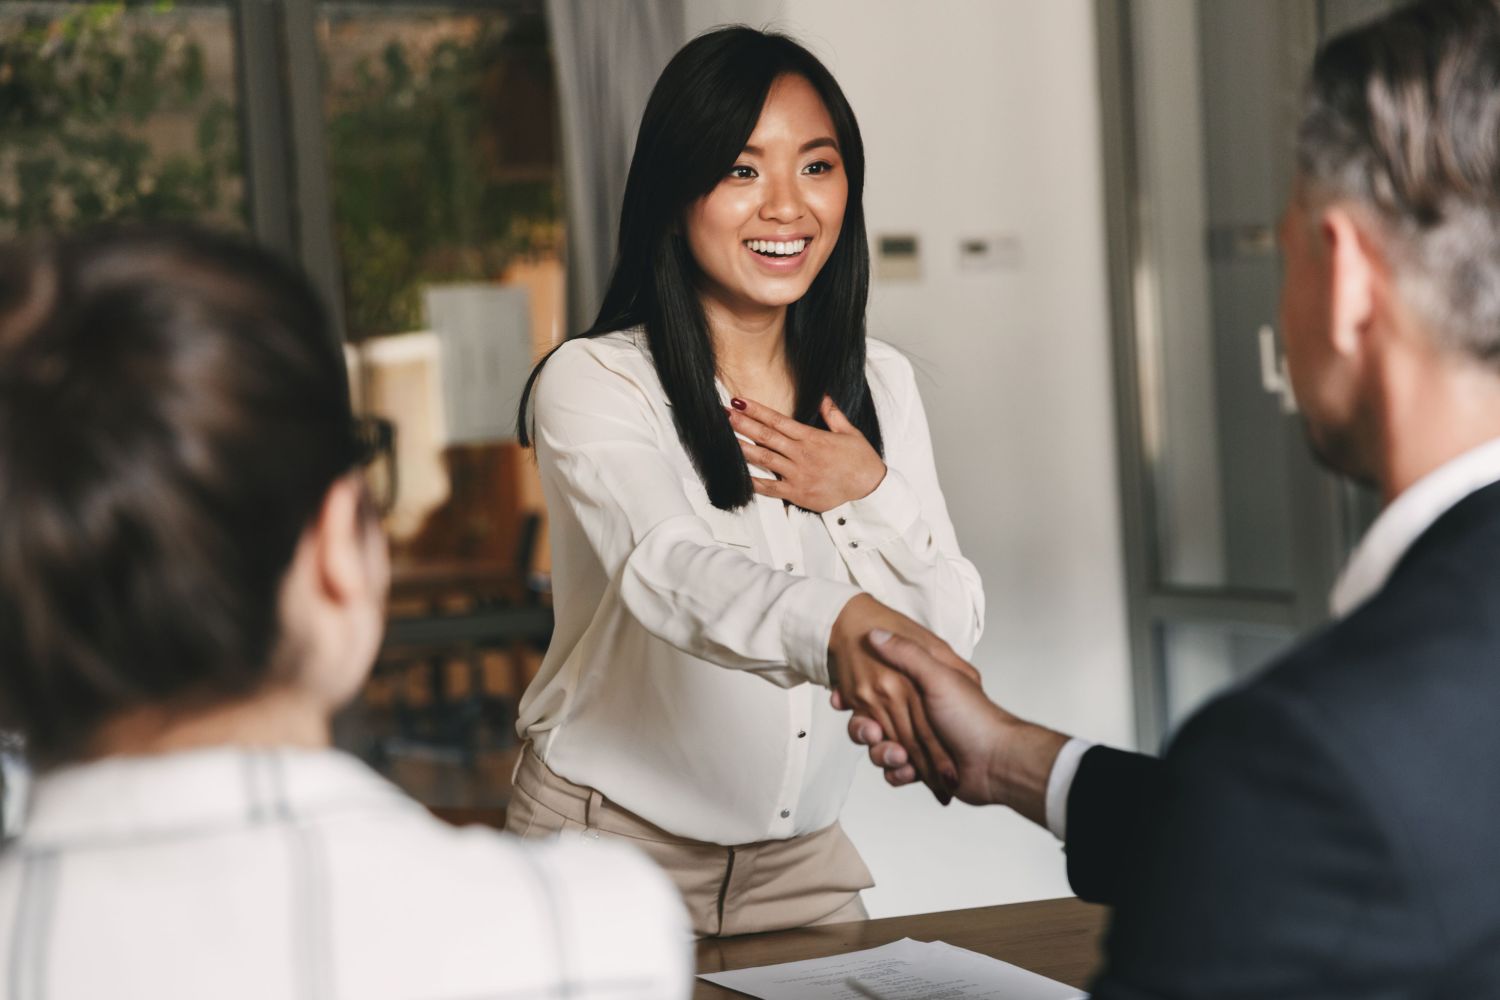 A woman shakes hands in a job interview